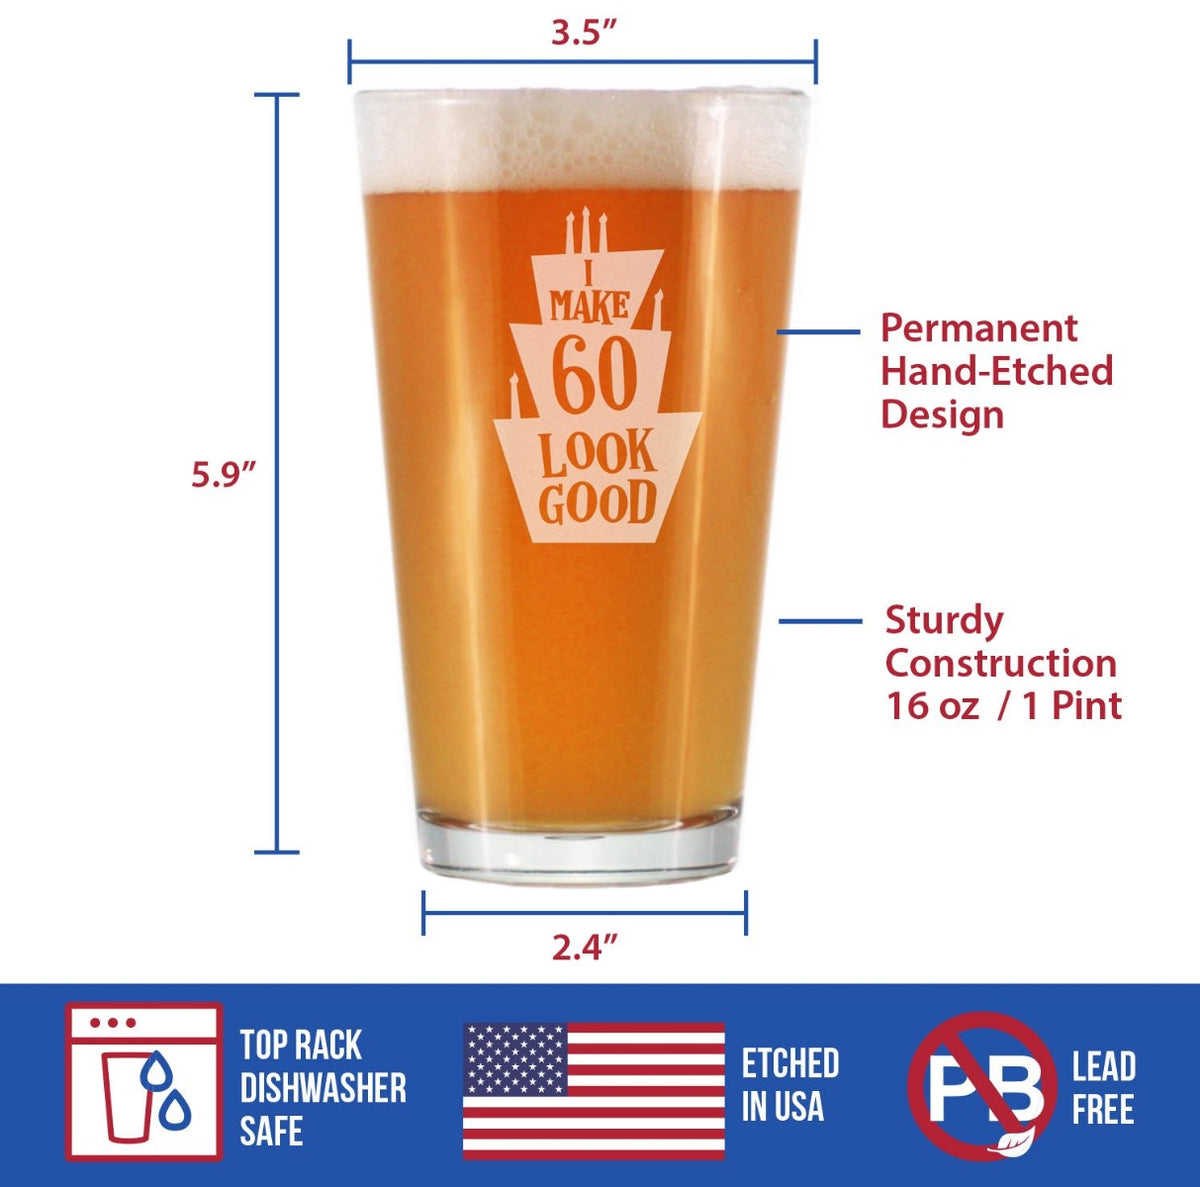 Make 60 Look Good - Funny 16 oz Pint Glass for Beer - 60th Birthday Gifts for Men or Women Turning 60 - Bday Party Decor